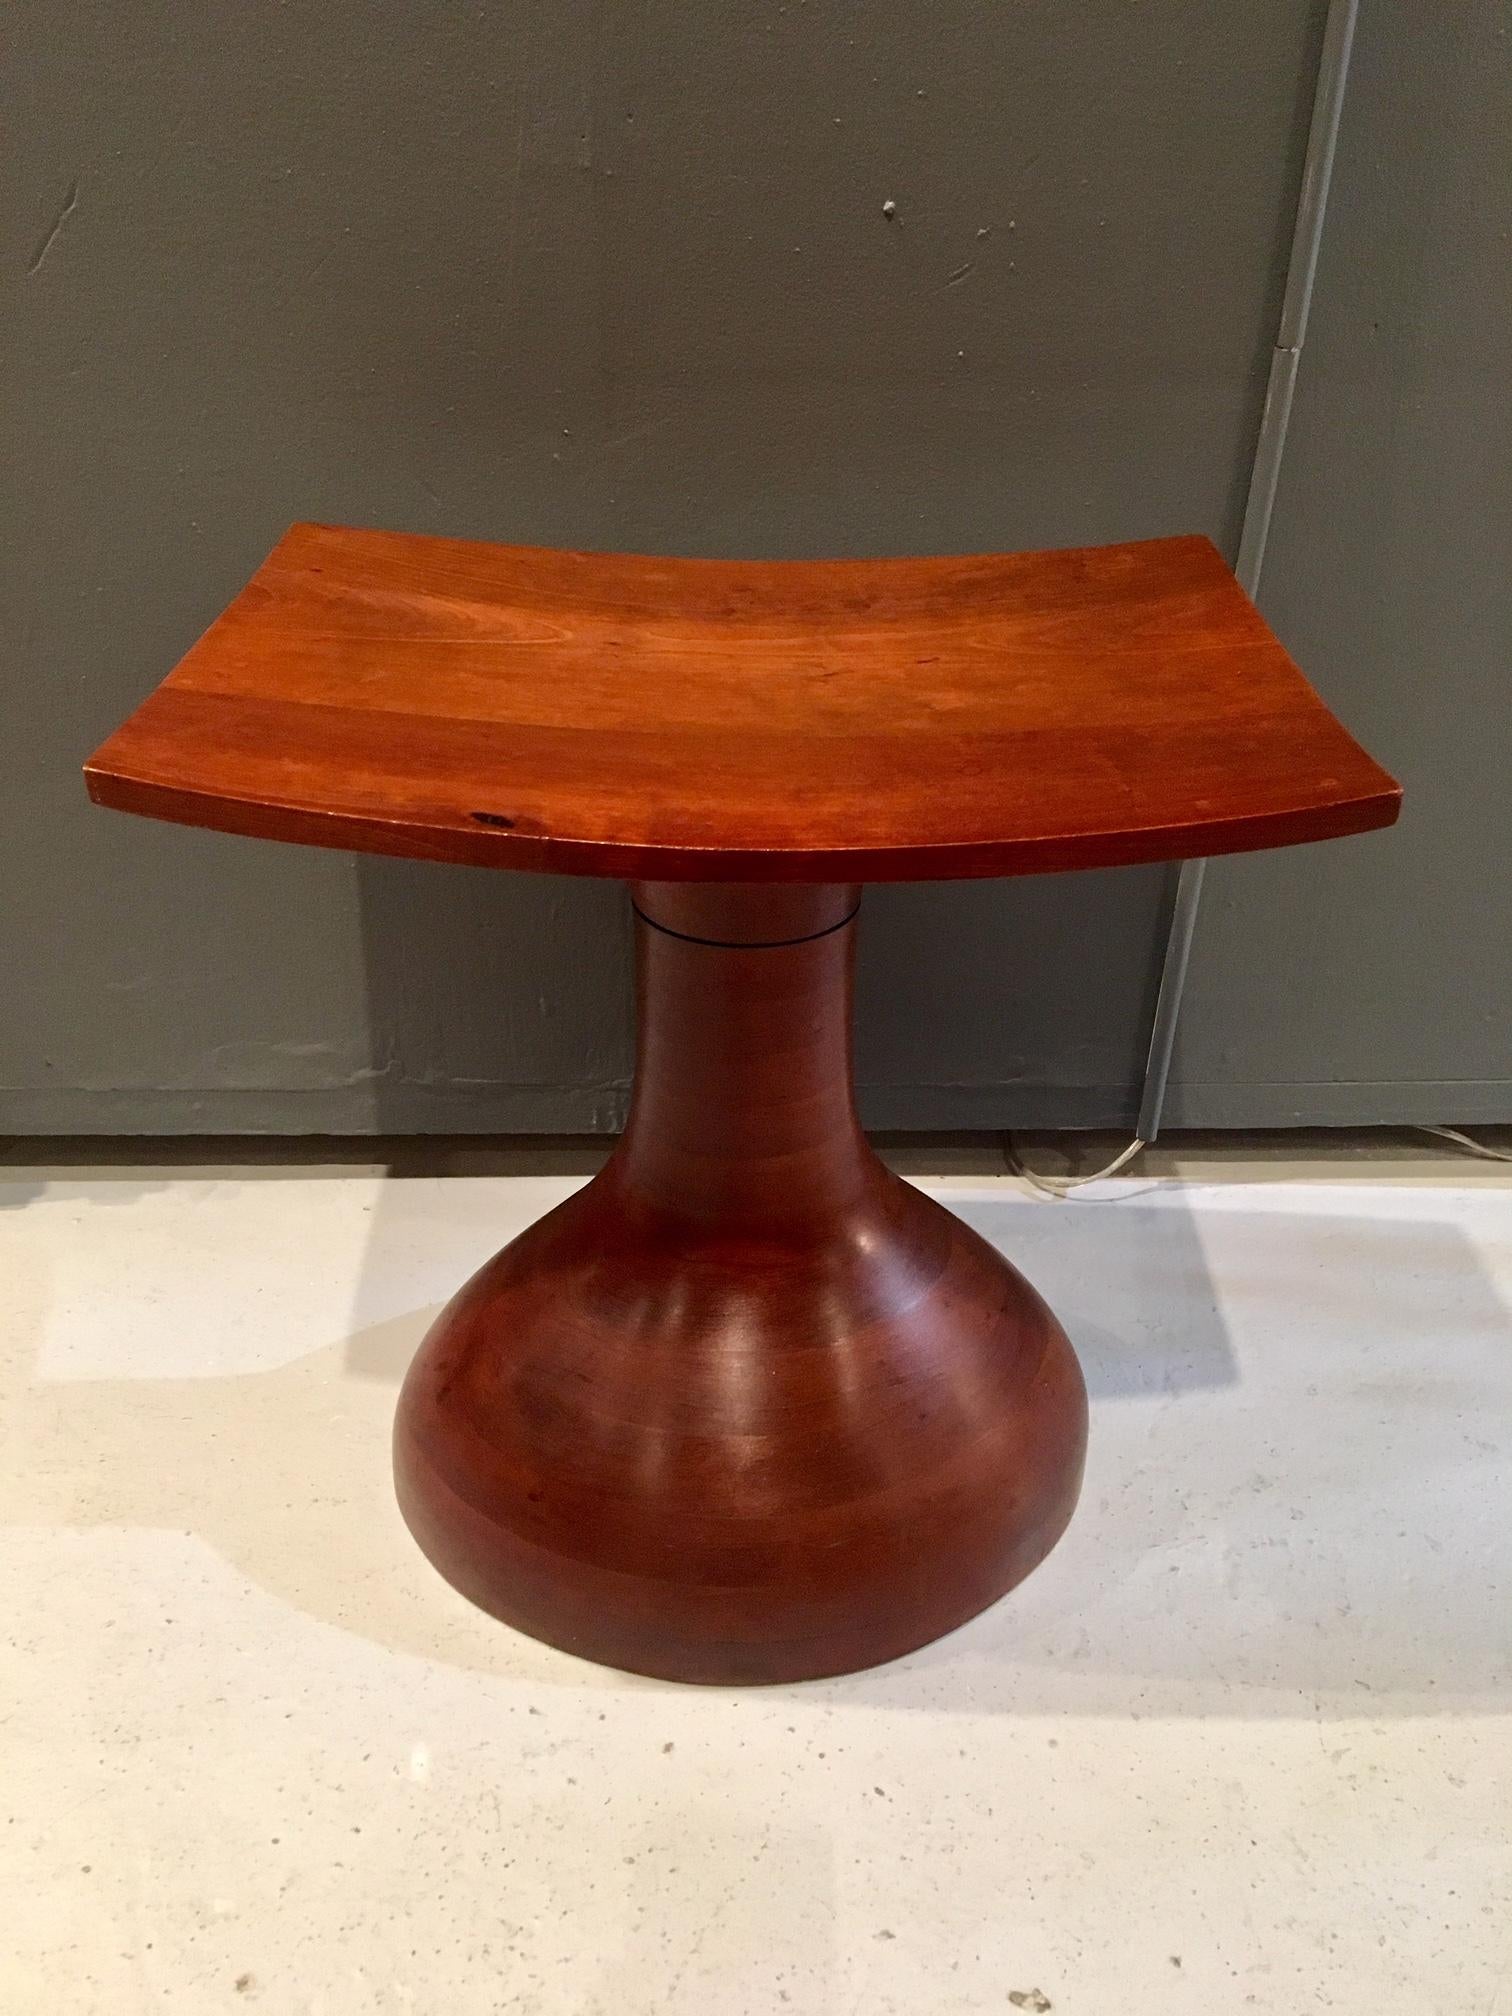 American Craftsman Wendell Castle Stack - Laminated Stool, 1963